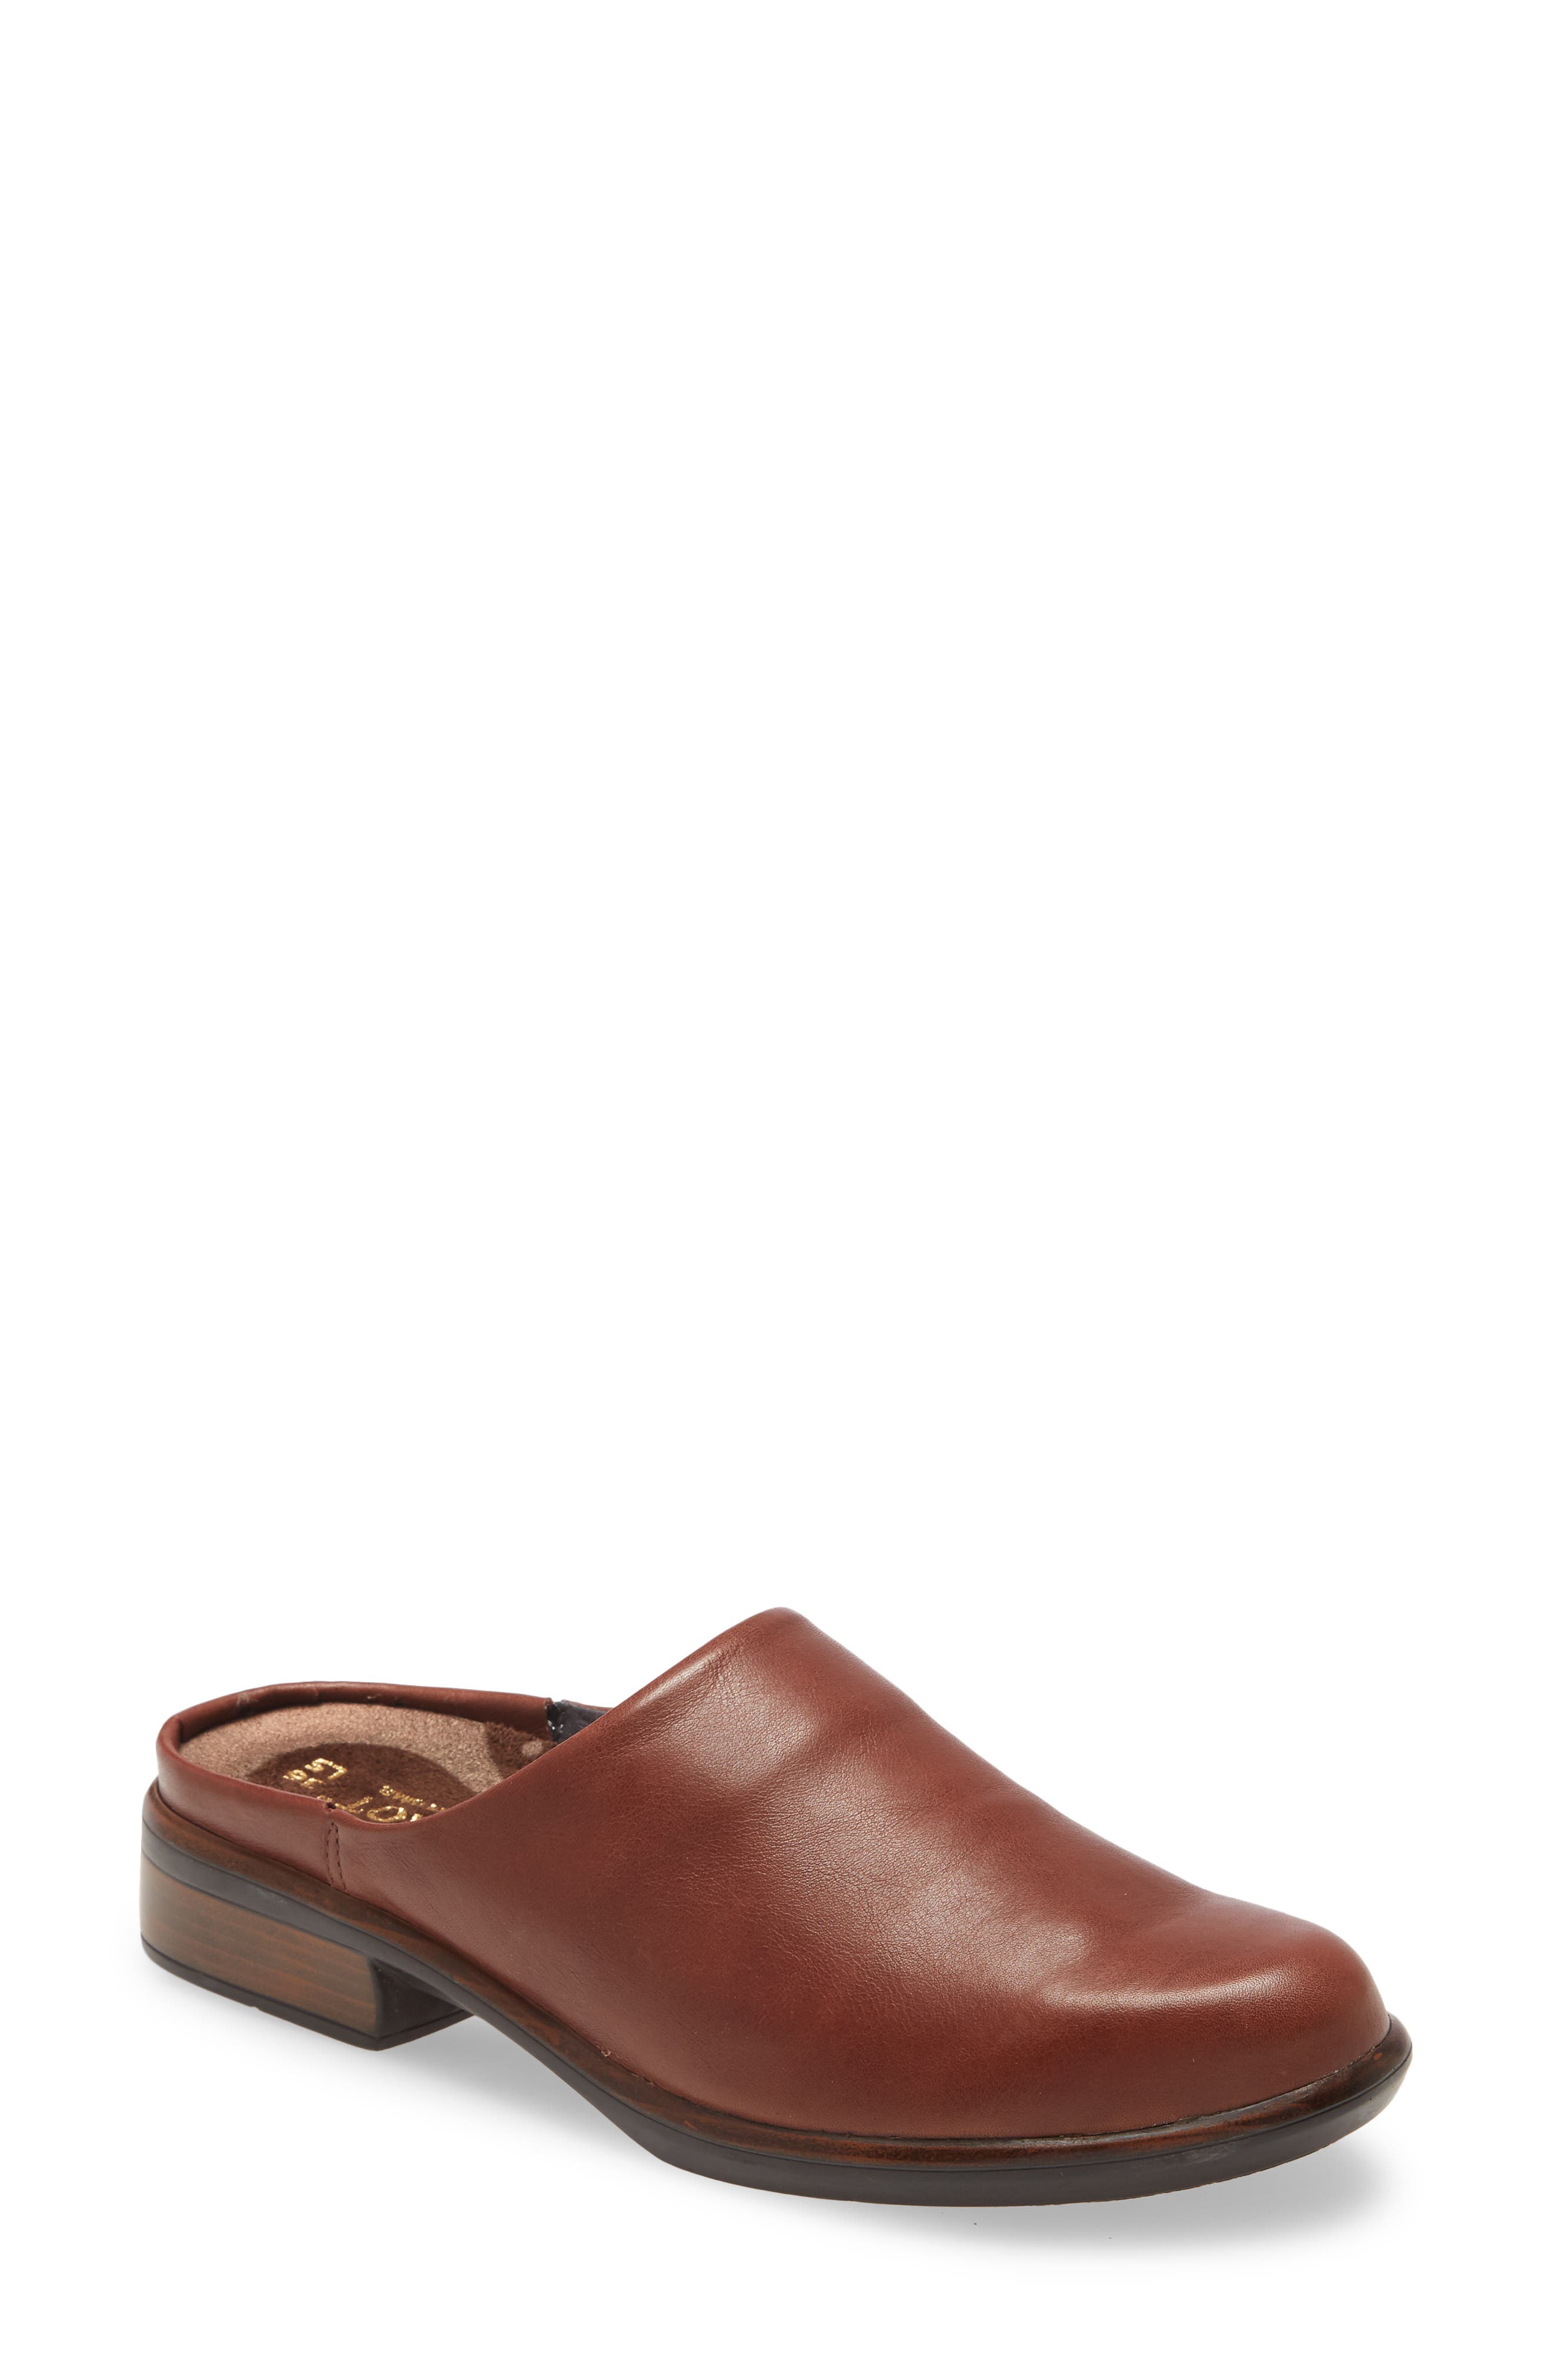 nordstrom clogs and mules